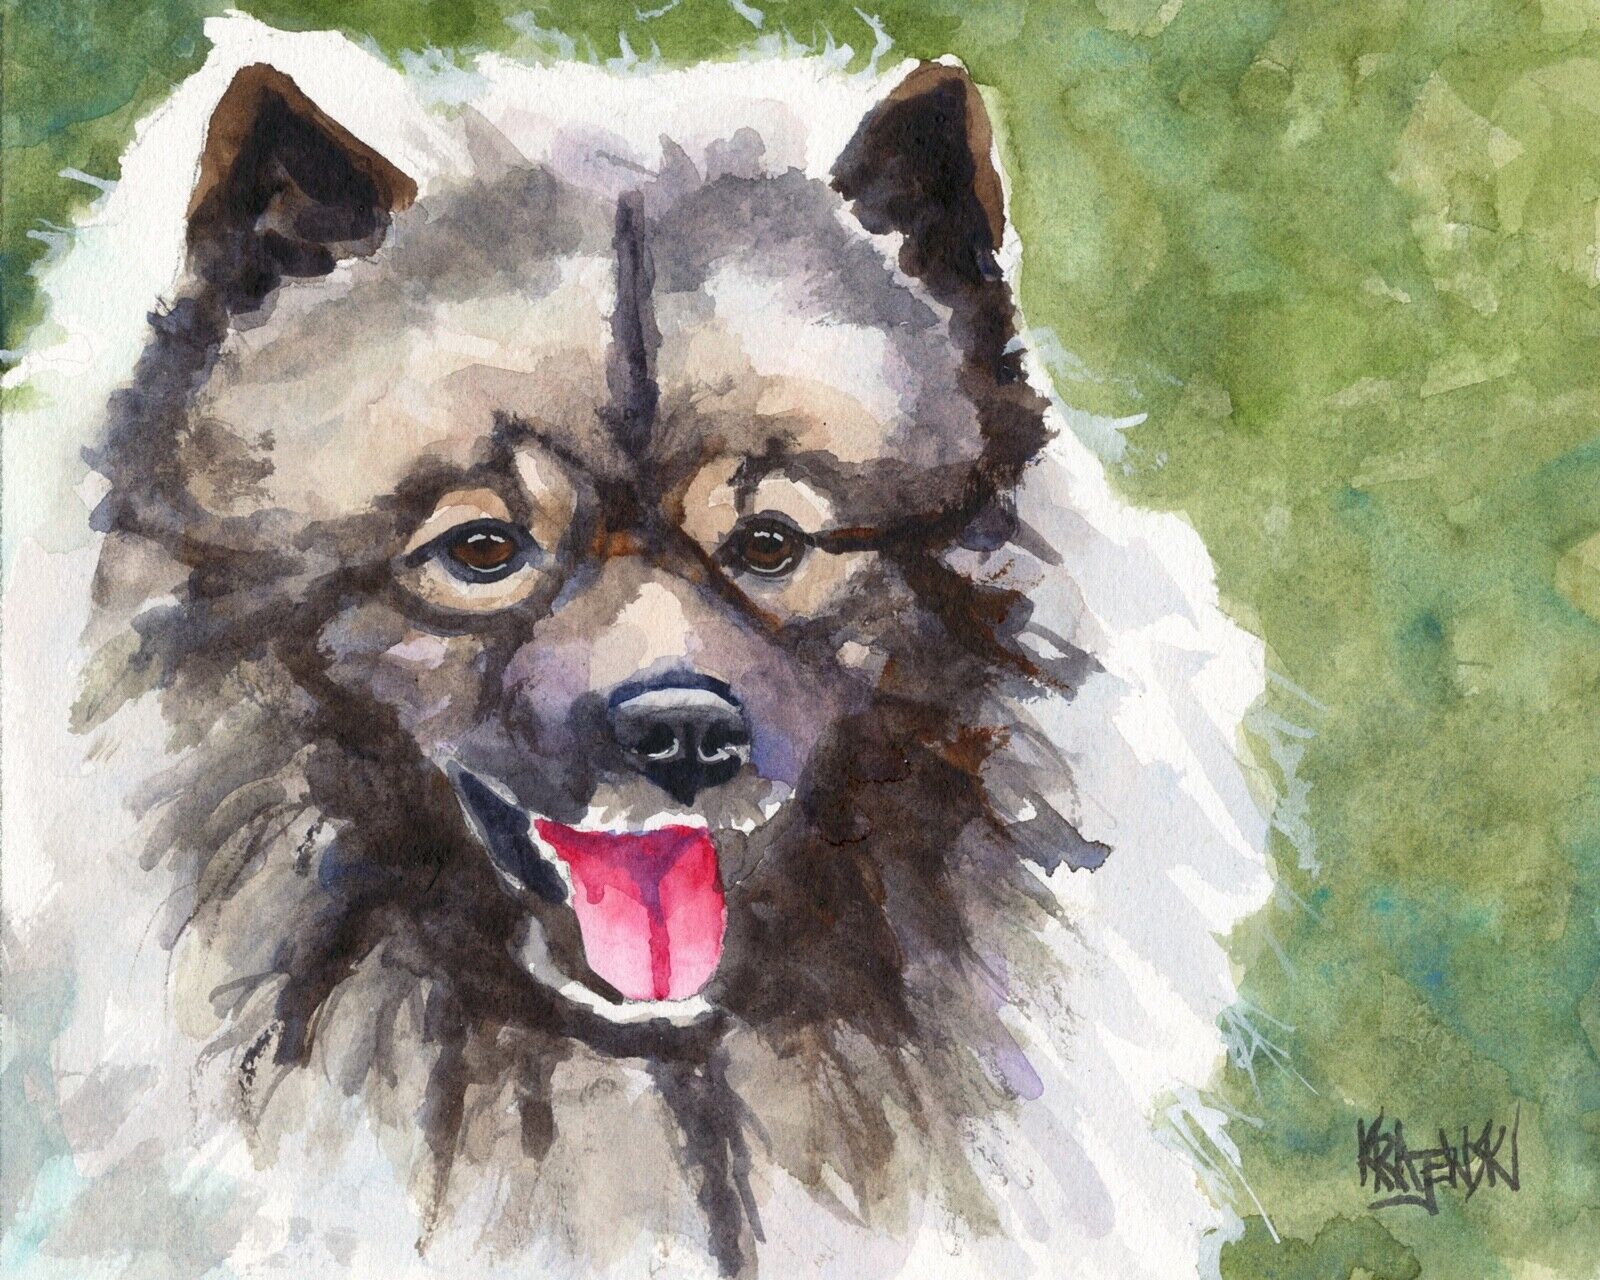 Keeshond Art Print | Keeshond Dog Gifts | From Original Painting | 11x14\